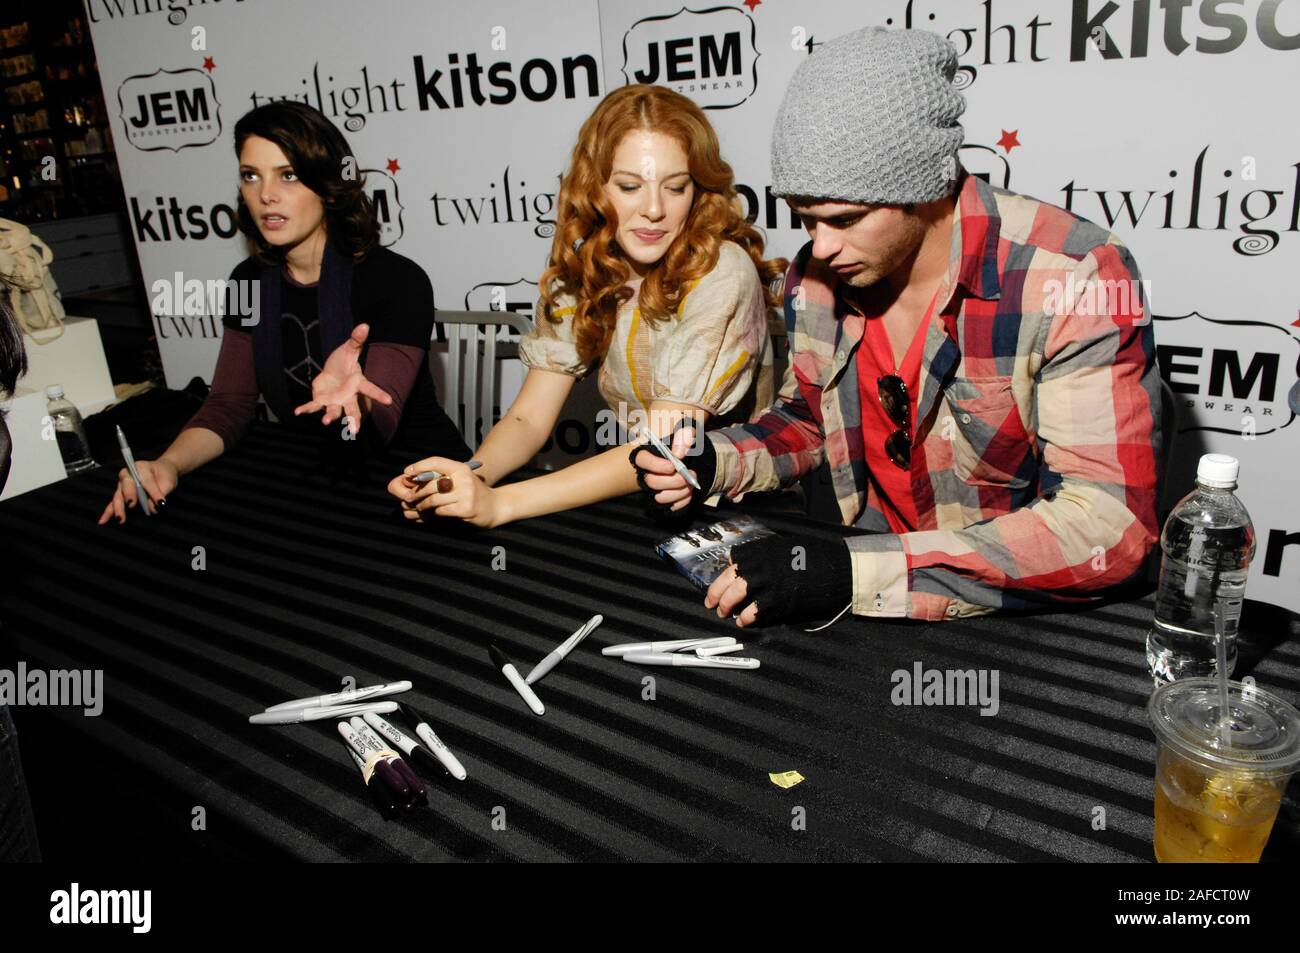 Ashley Greene, Rachelle Lefevre and Kellan Lutz during the 'Twilight' DVD and apparel launch at Kitson in Los Angeles. Stock Photo